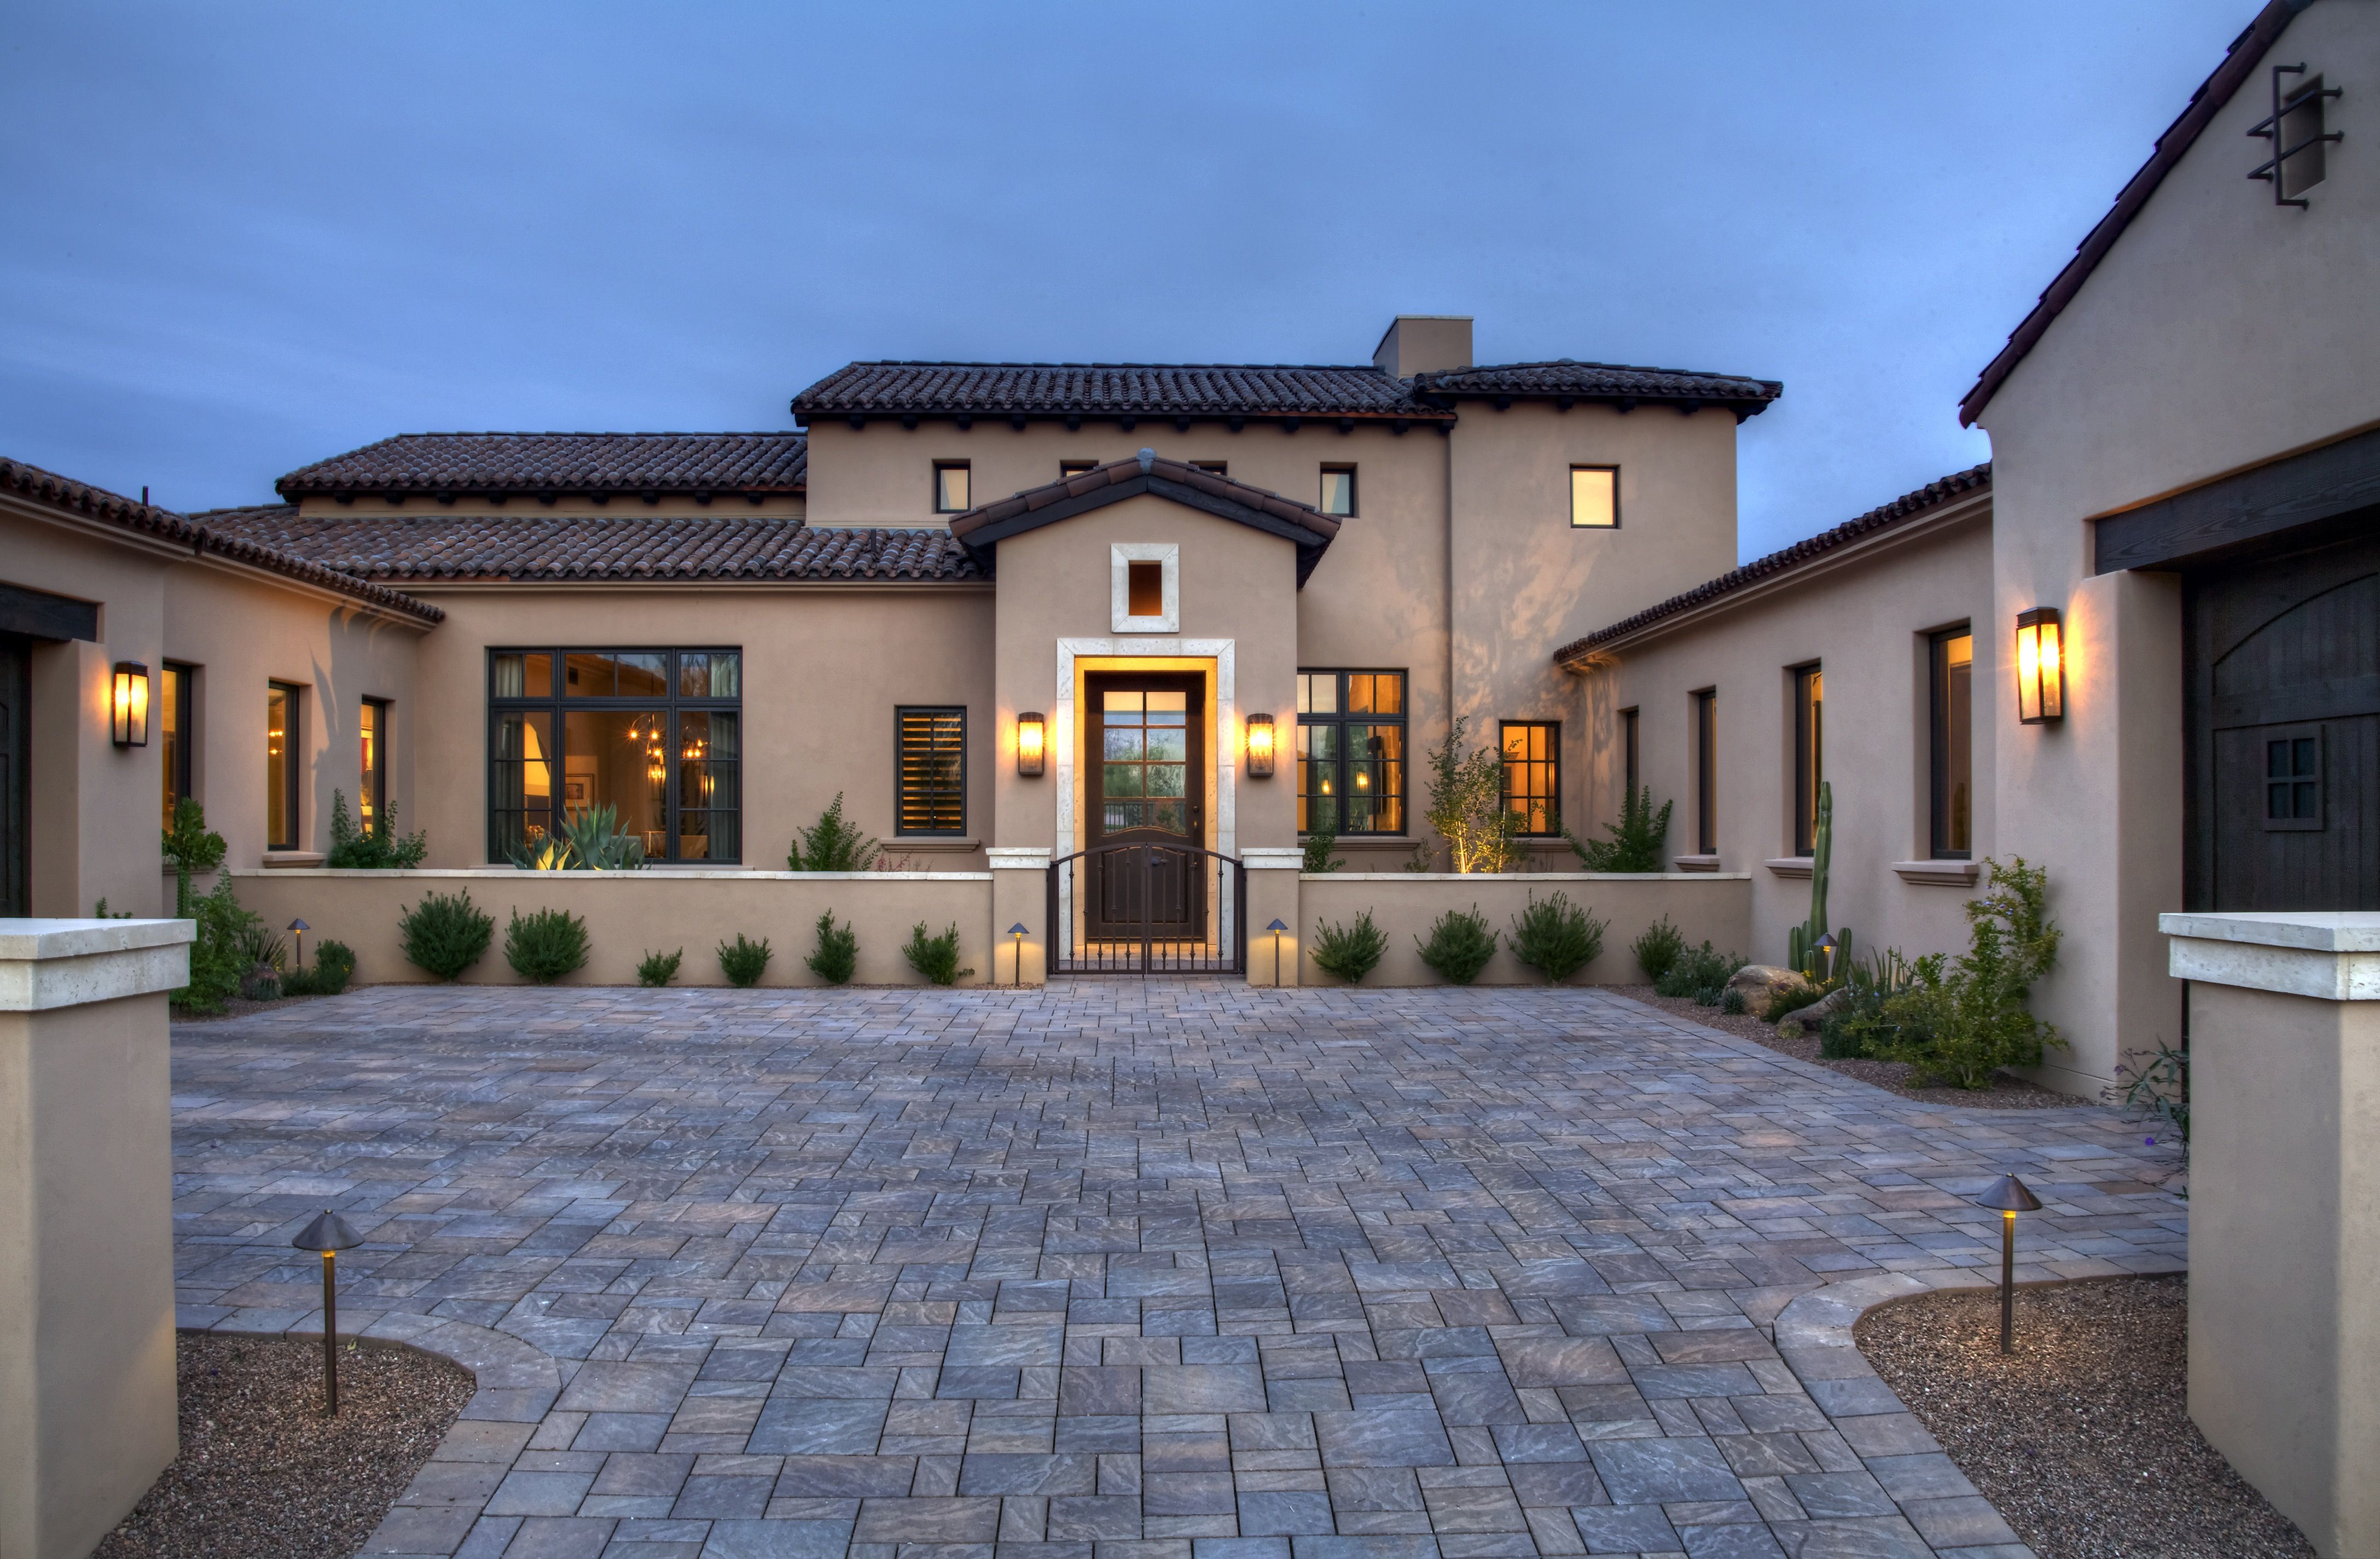 Minimalist Mediterranean Stucco Home With Spanish Tile Rooftop (Image 24 of 30)